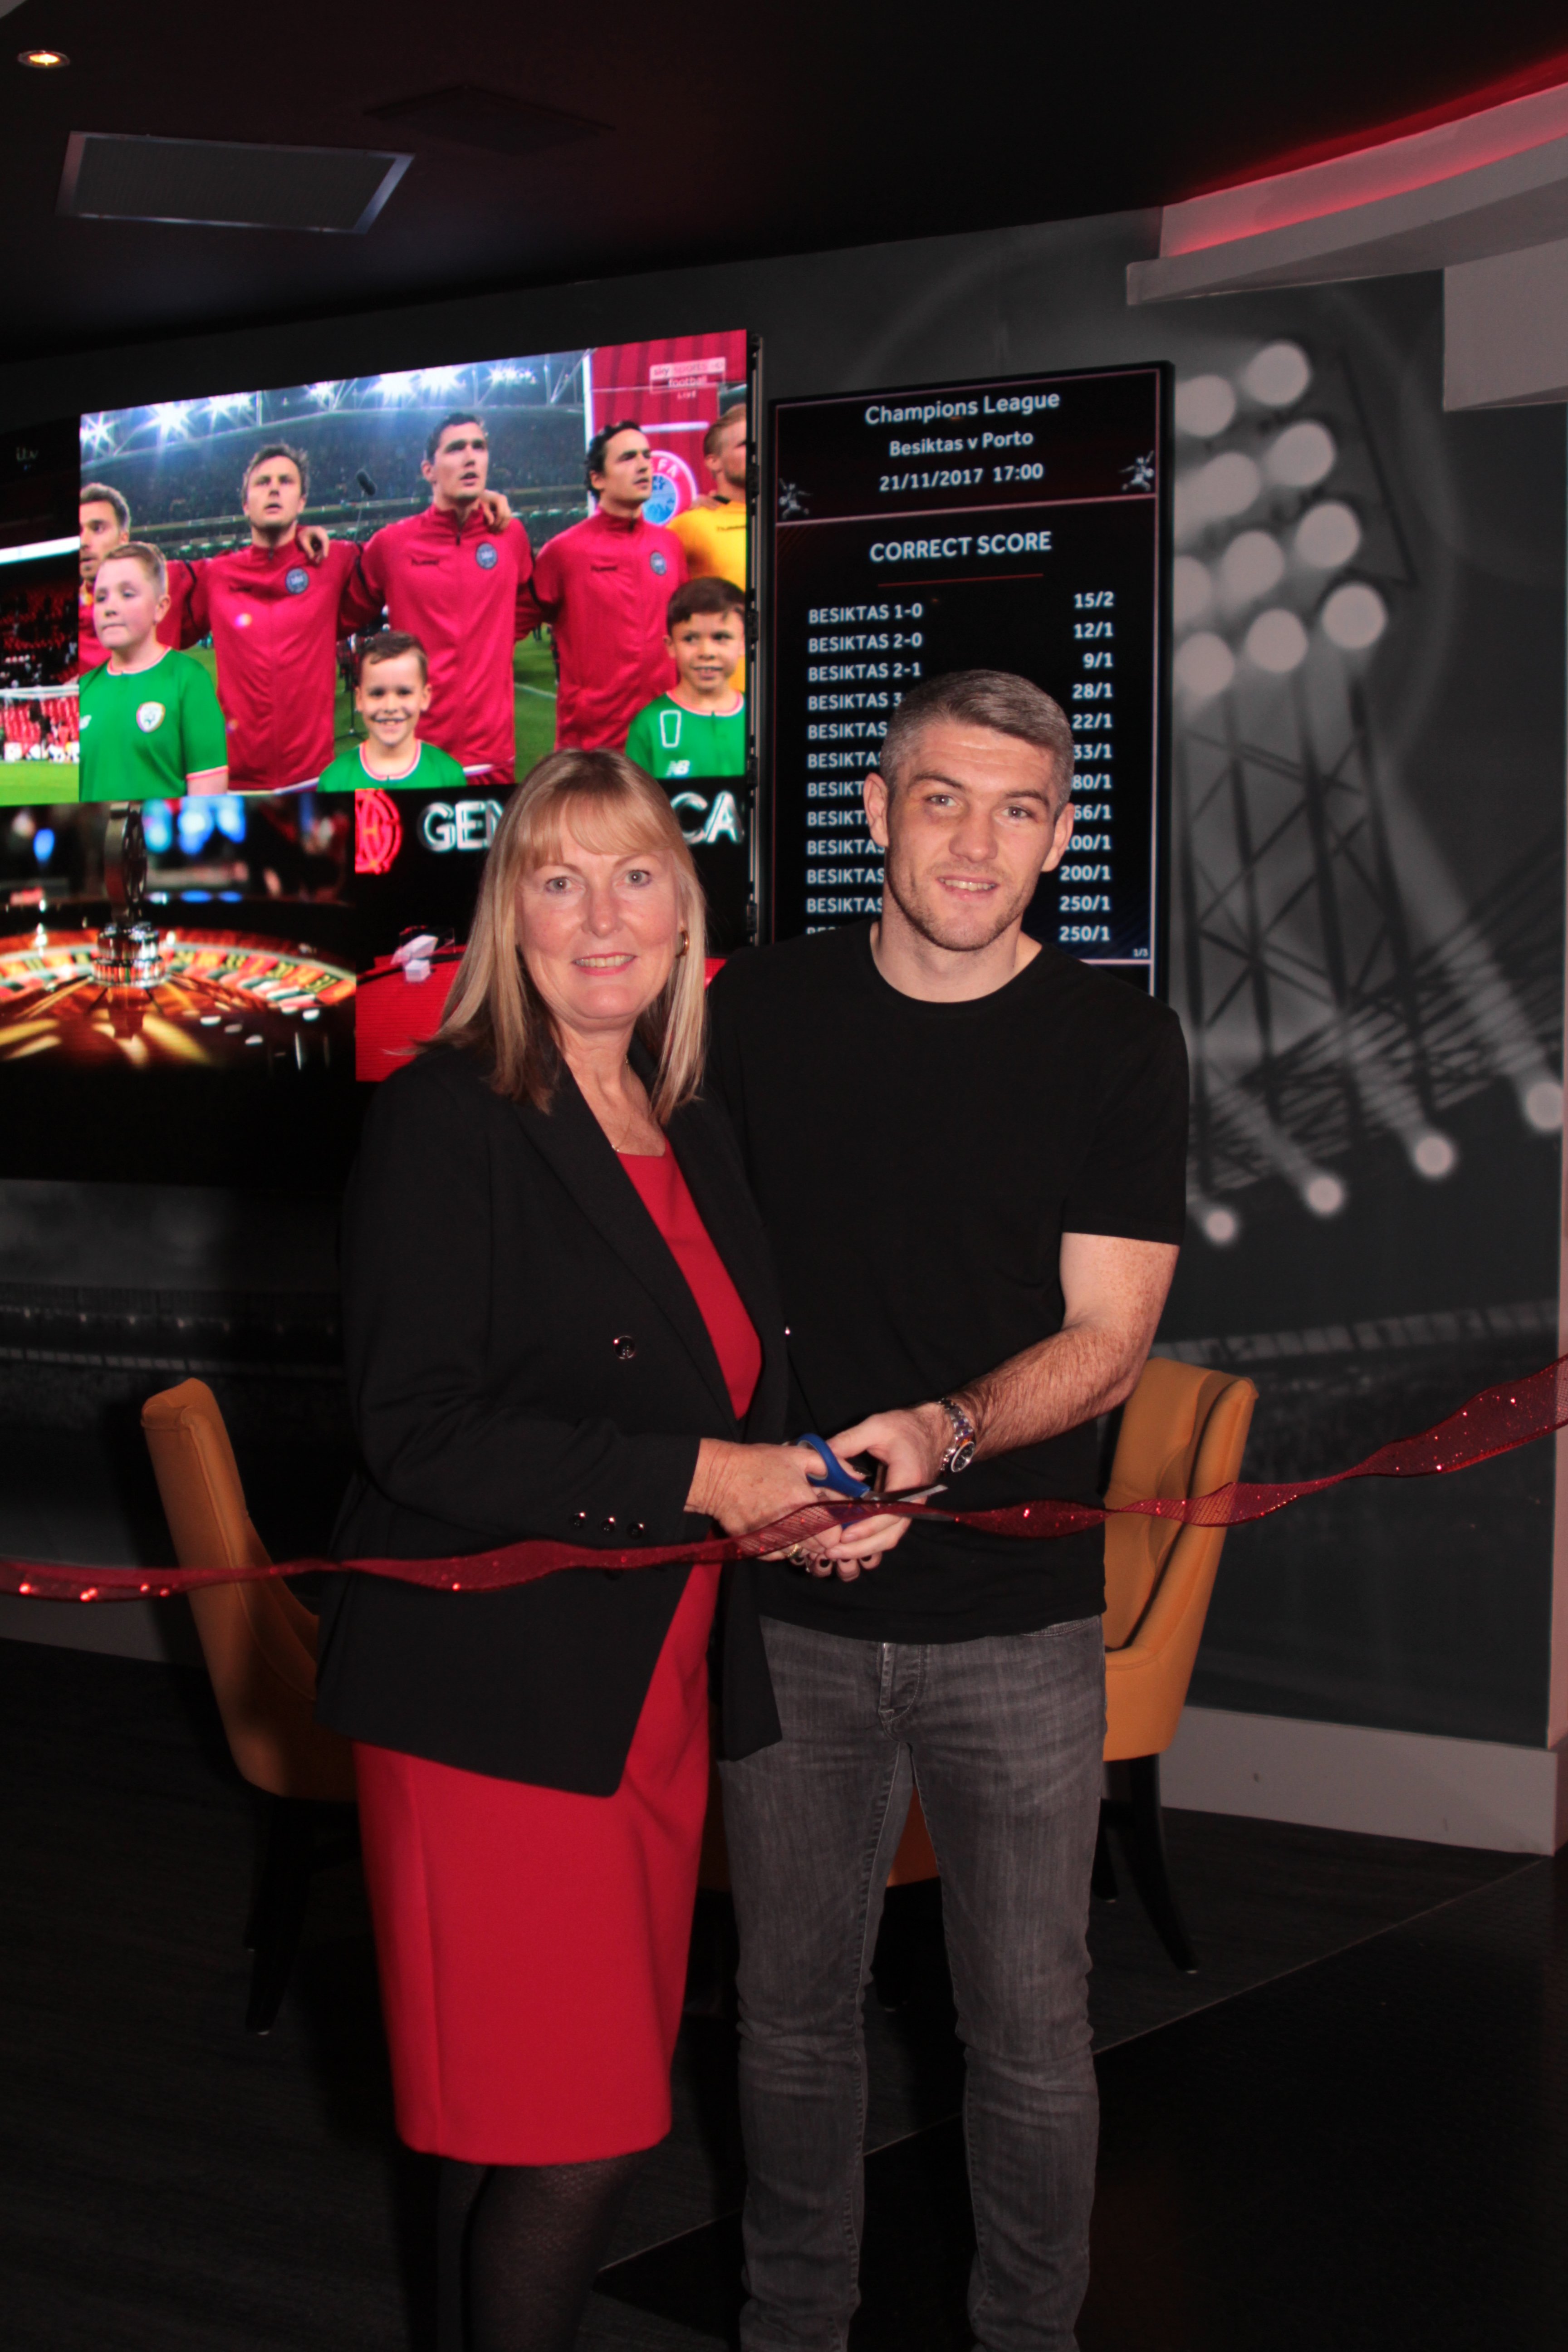 Genting Casino in Queen Square launches Genting UK's first interactive sports  lounge